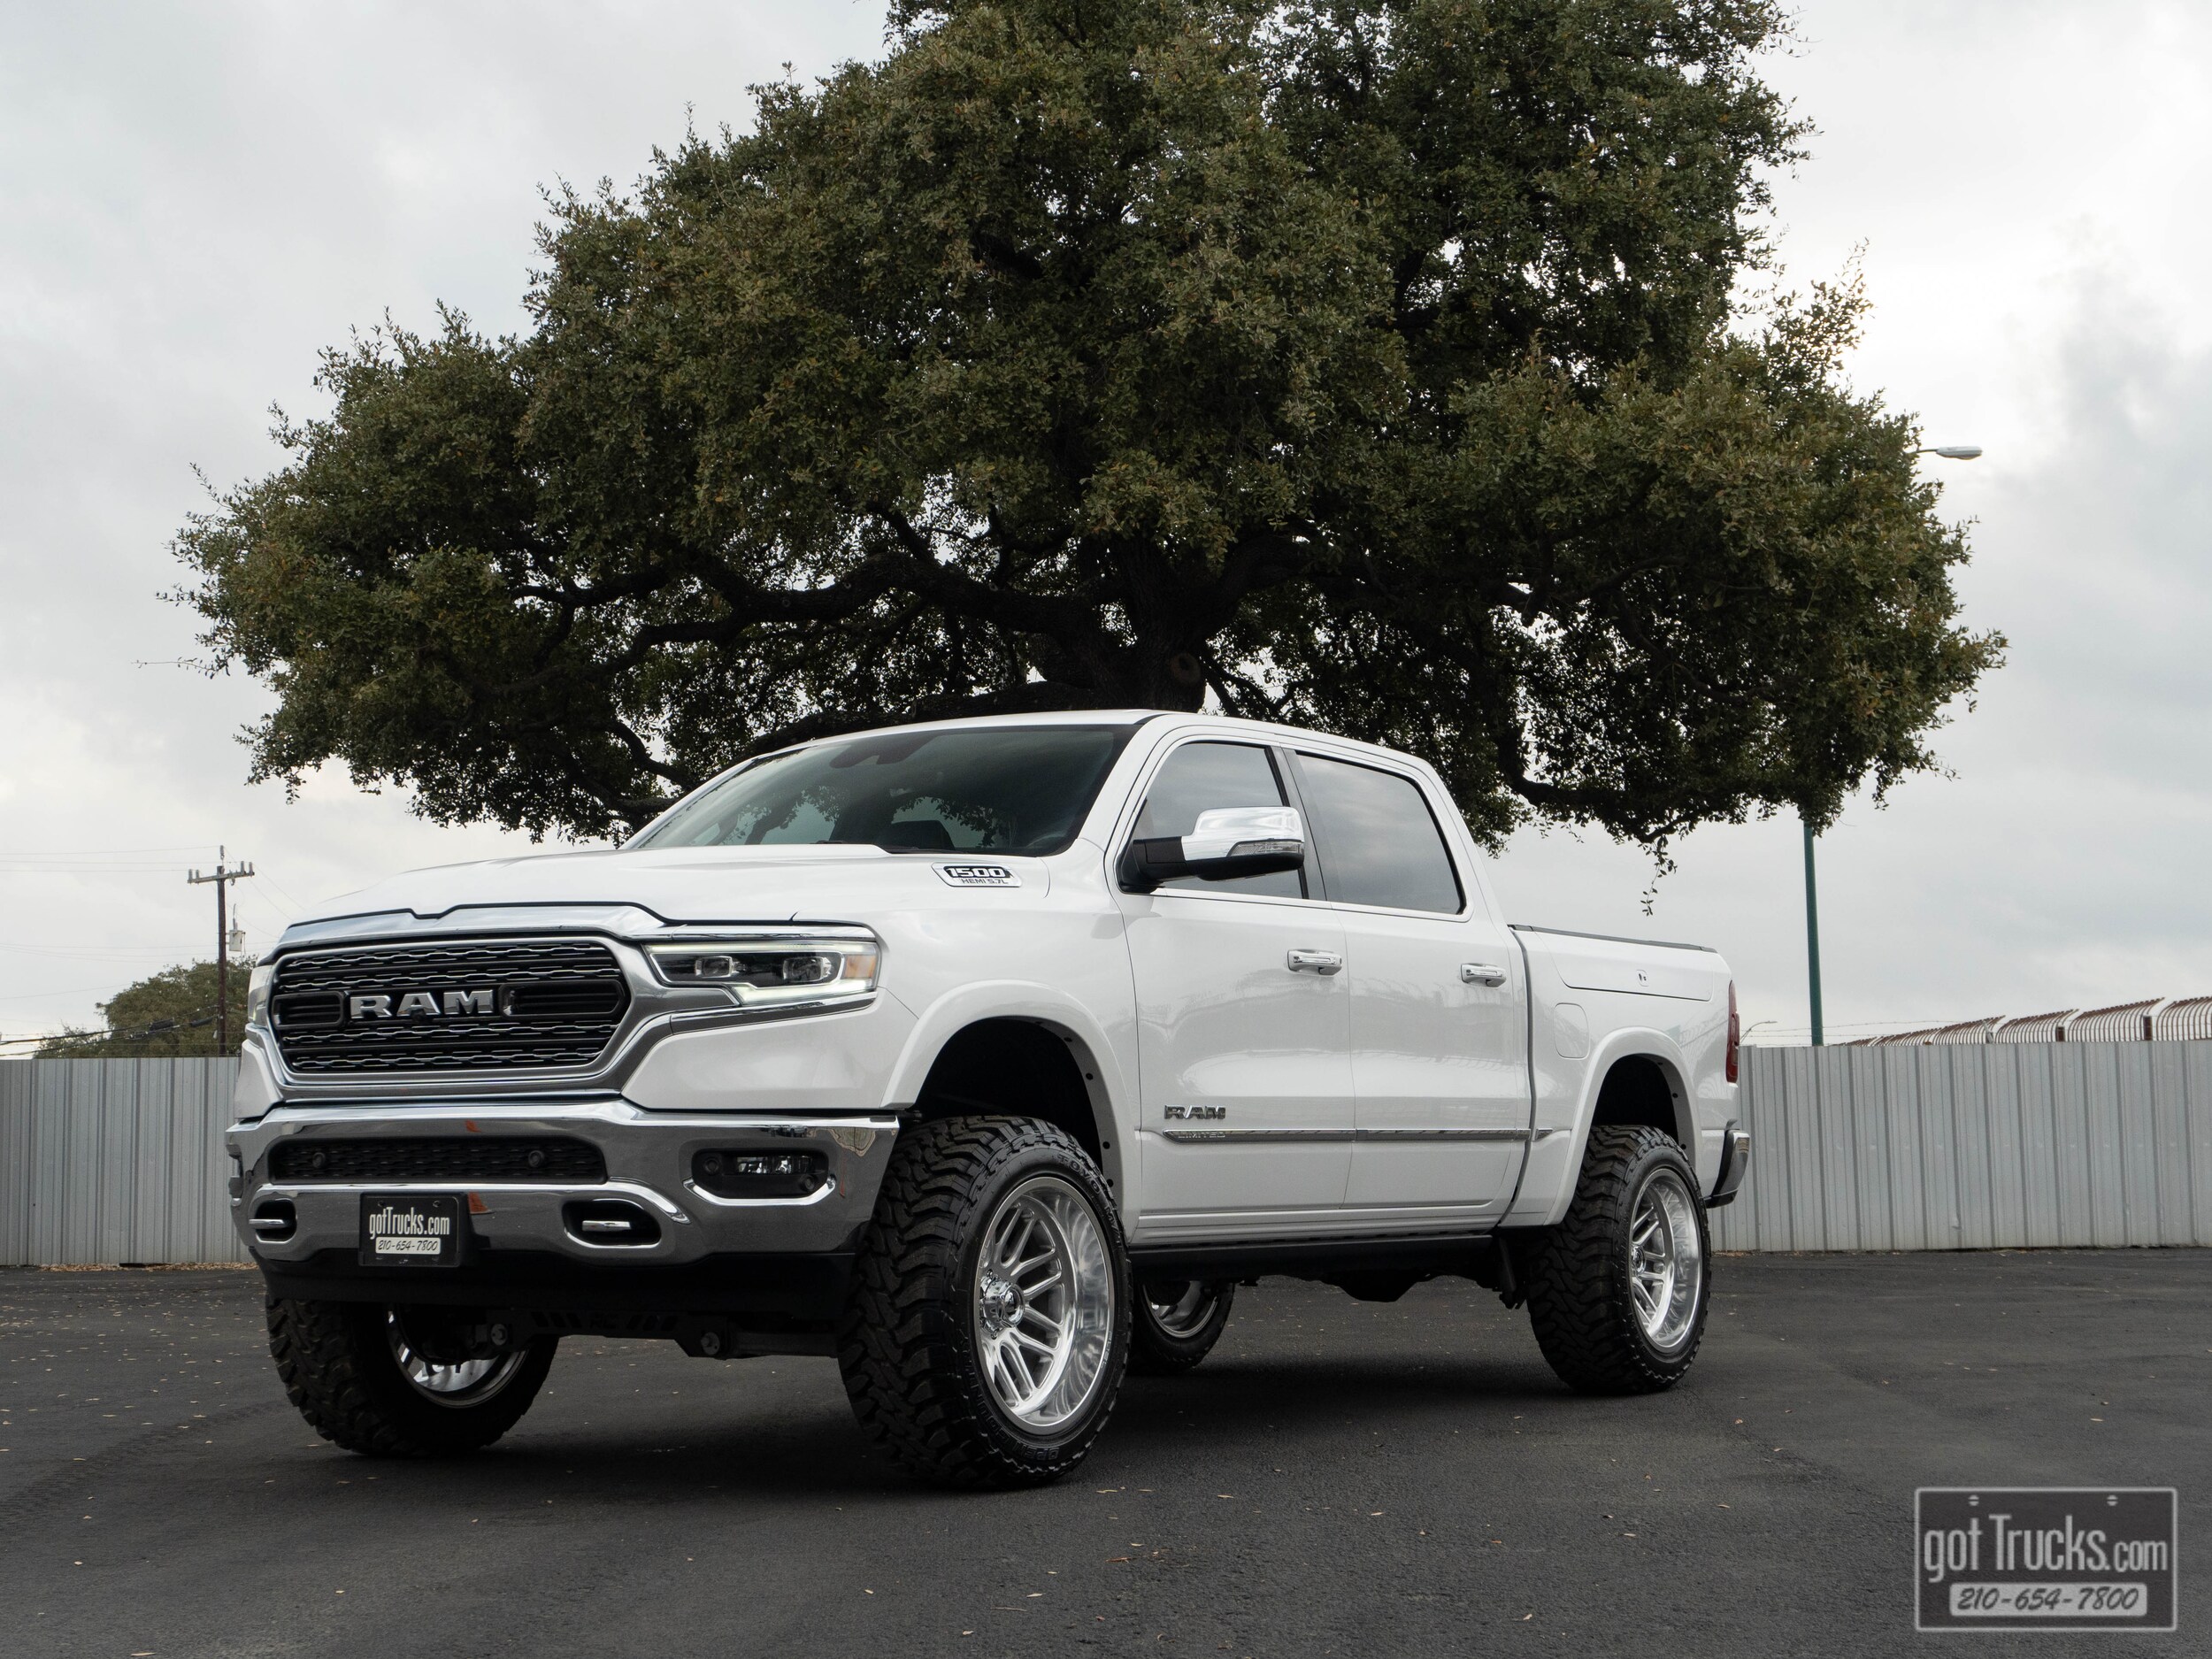 Used 2020 Dodge Ram 1500 For Sale At American Auto Brokers Vin 1c6srfht6ln286449